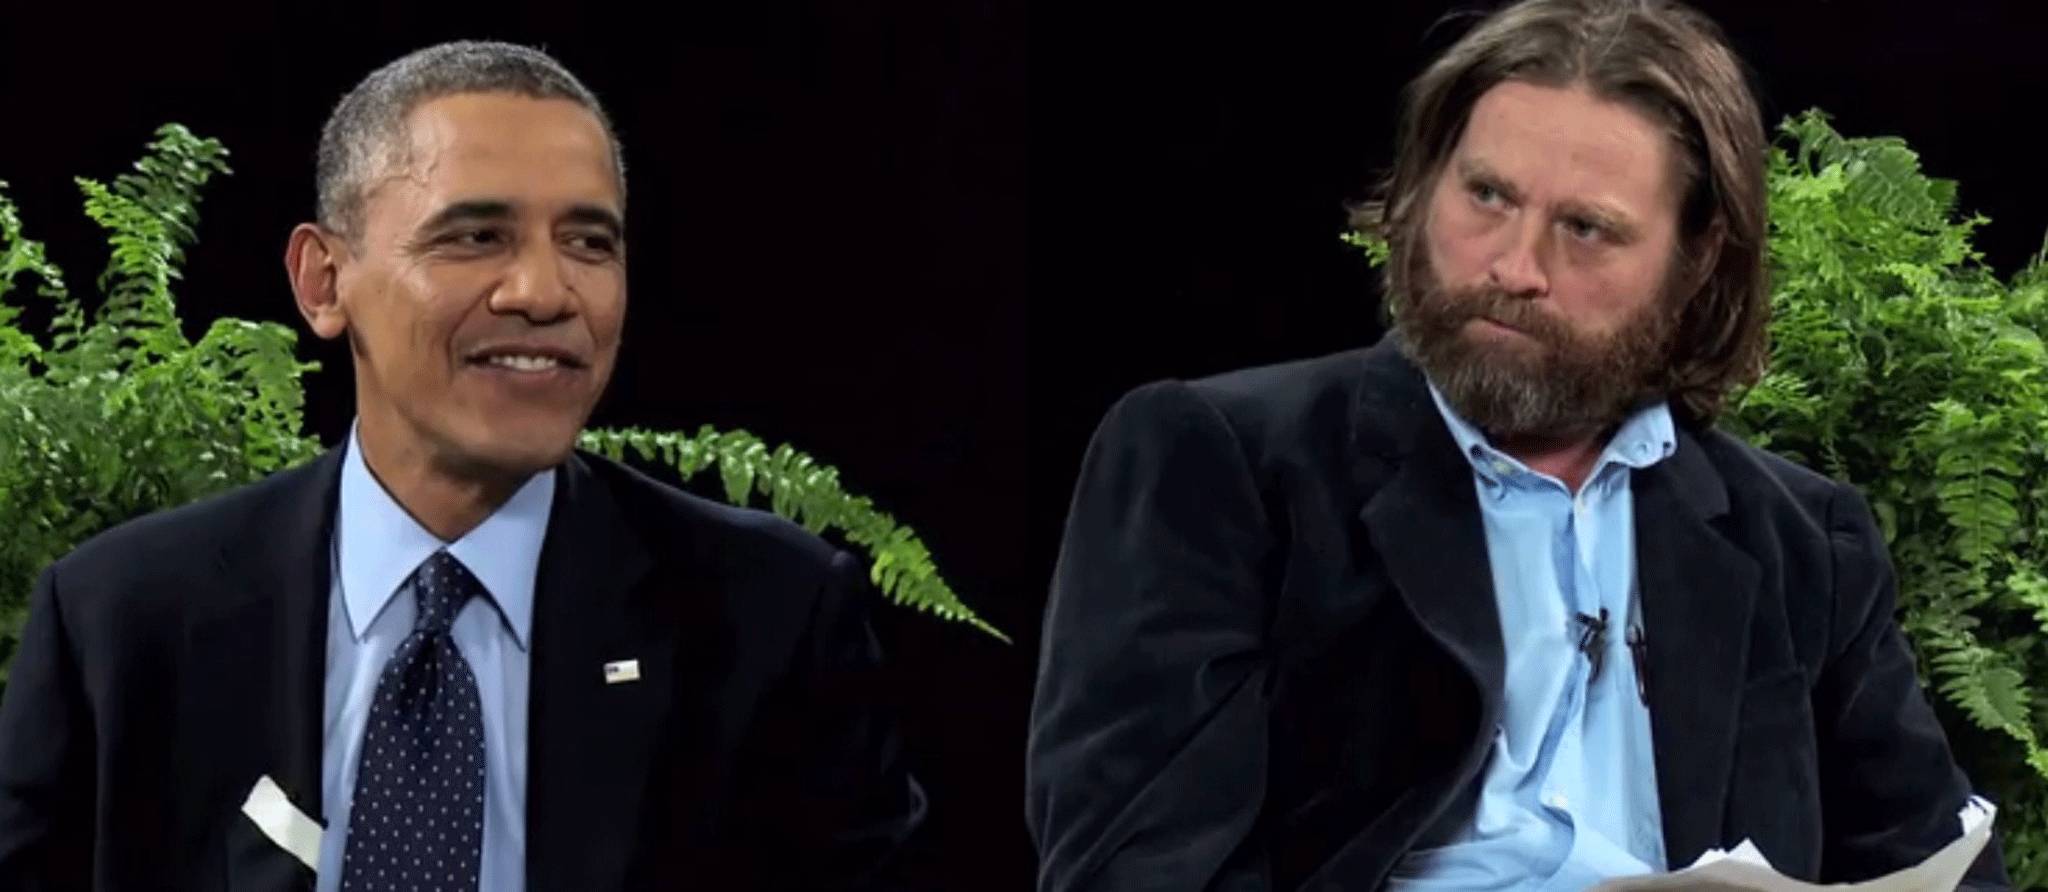 Obama and Galifianakis trade blows on Between Two Ferns